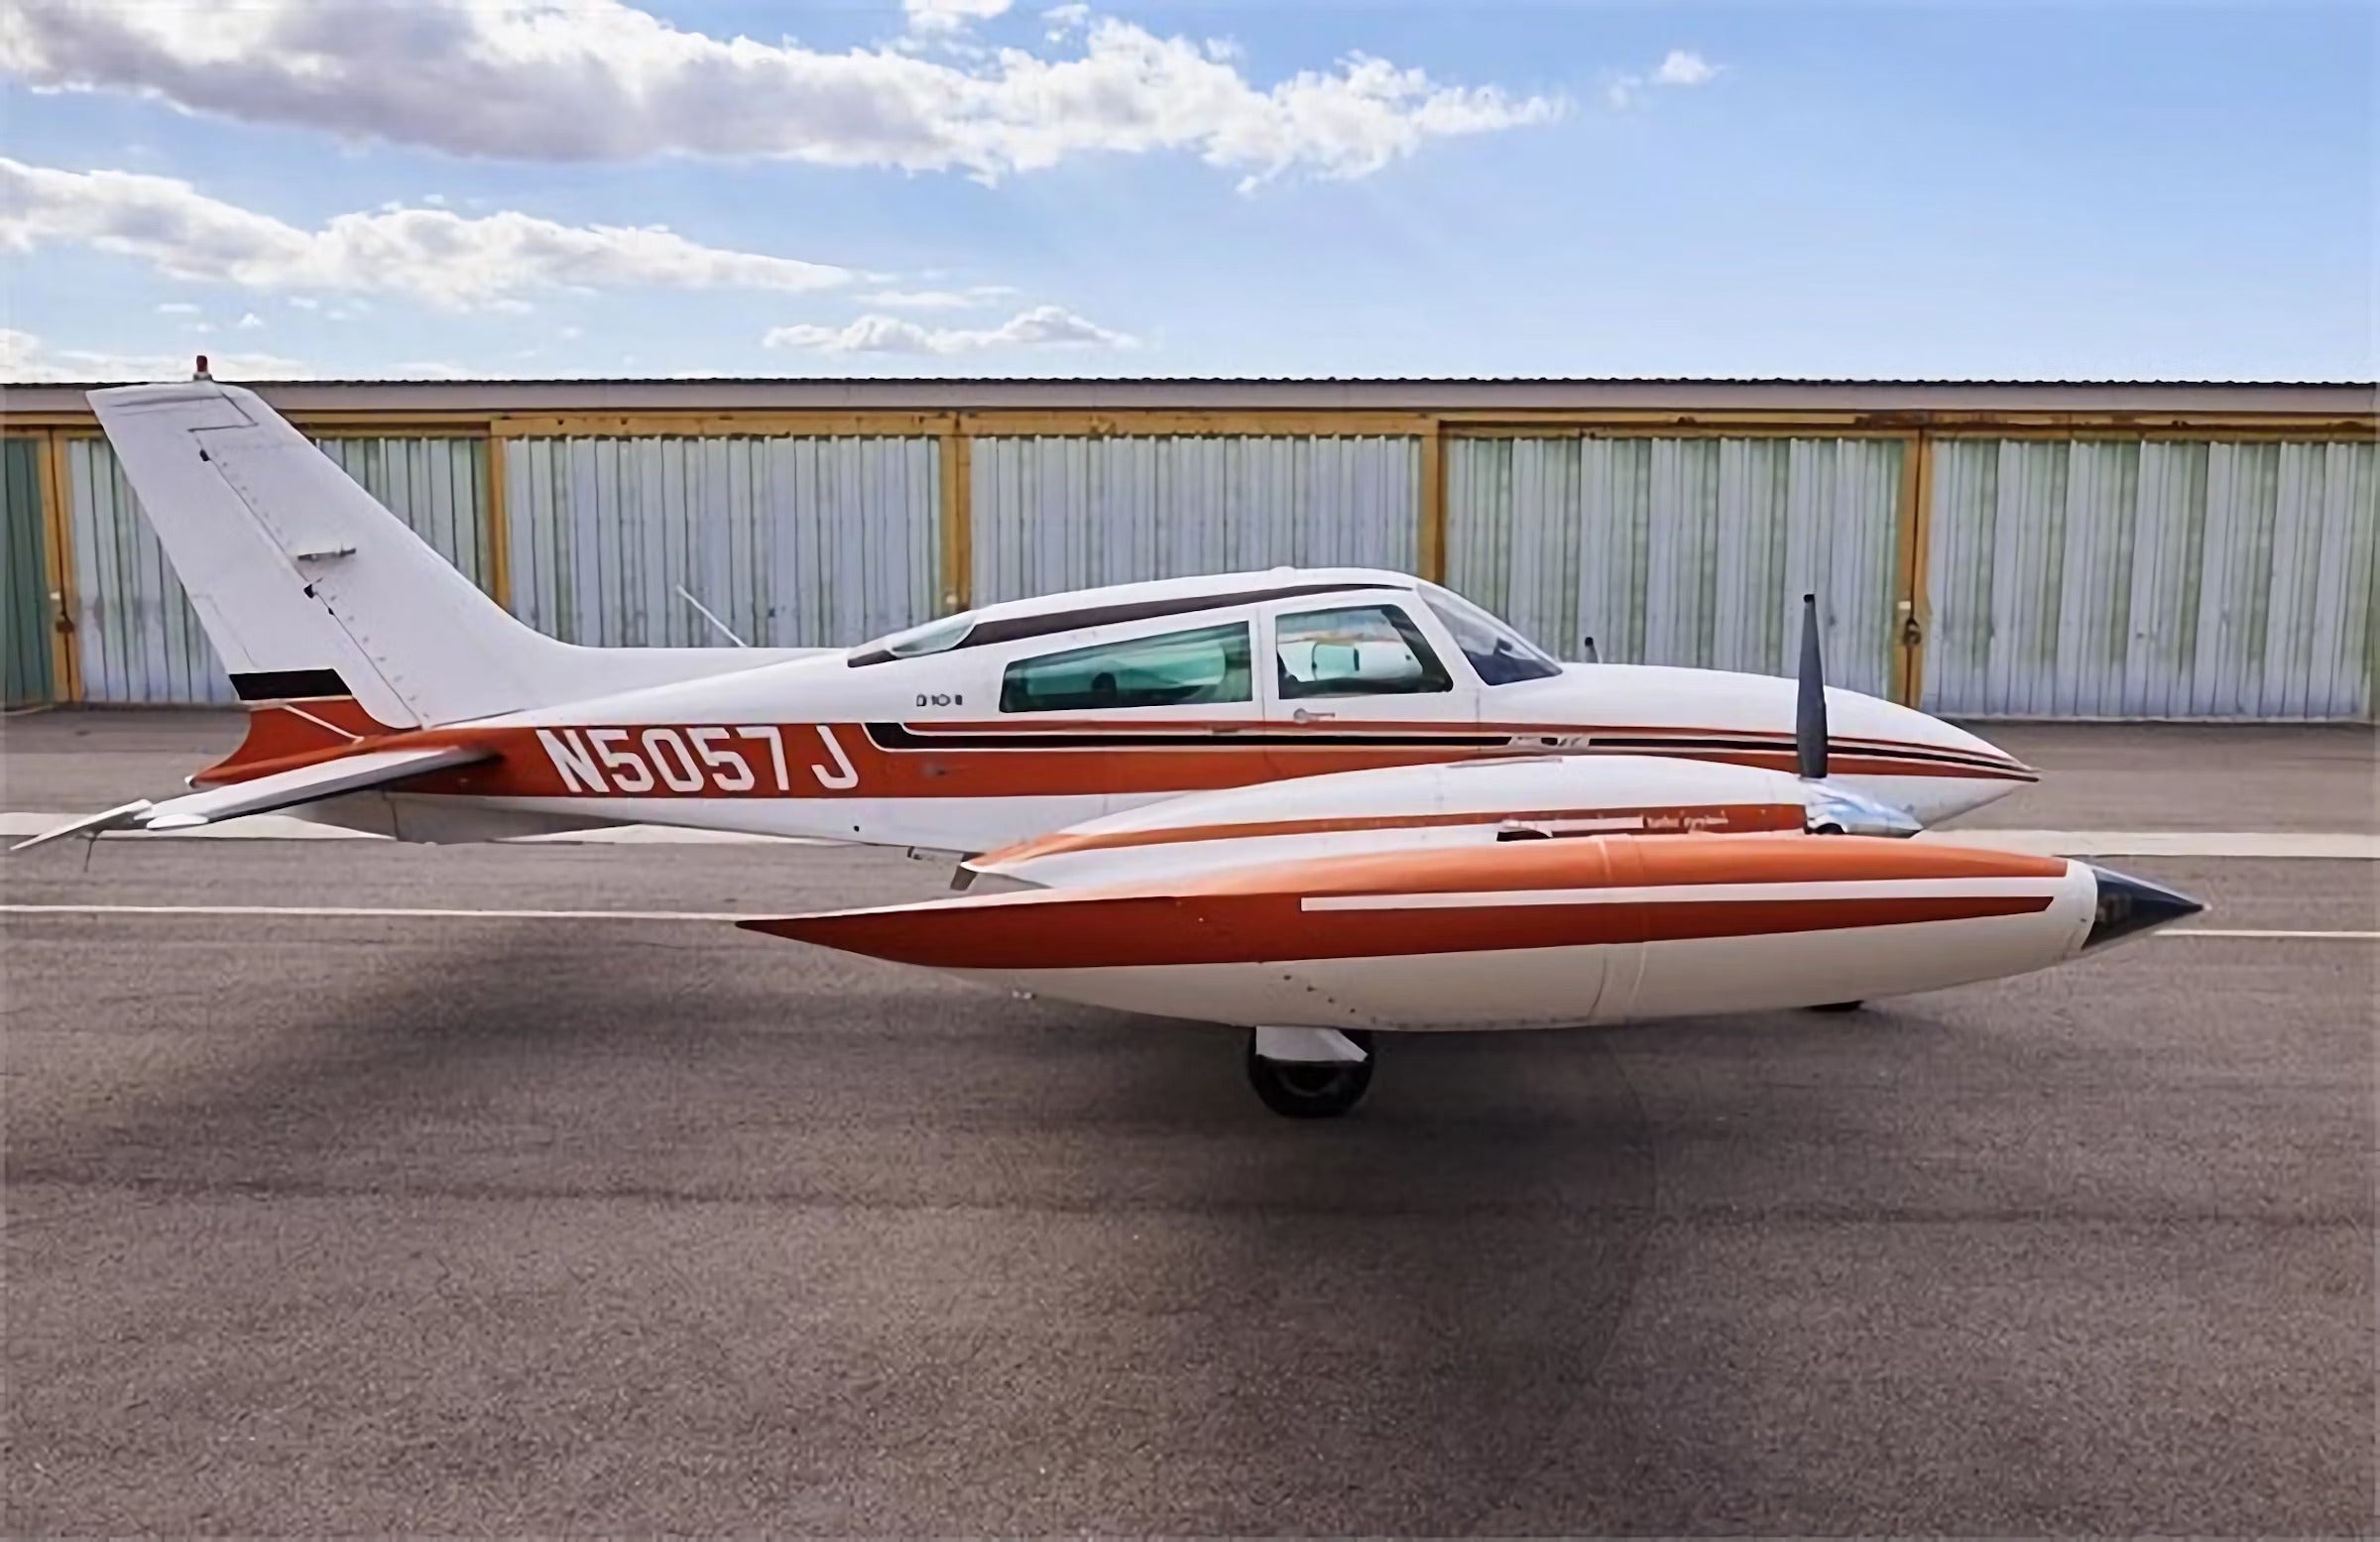 Today’s Top Aircraft For Sale Pick: 1975 Cessna T310R